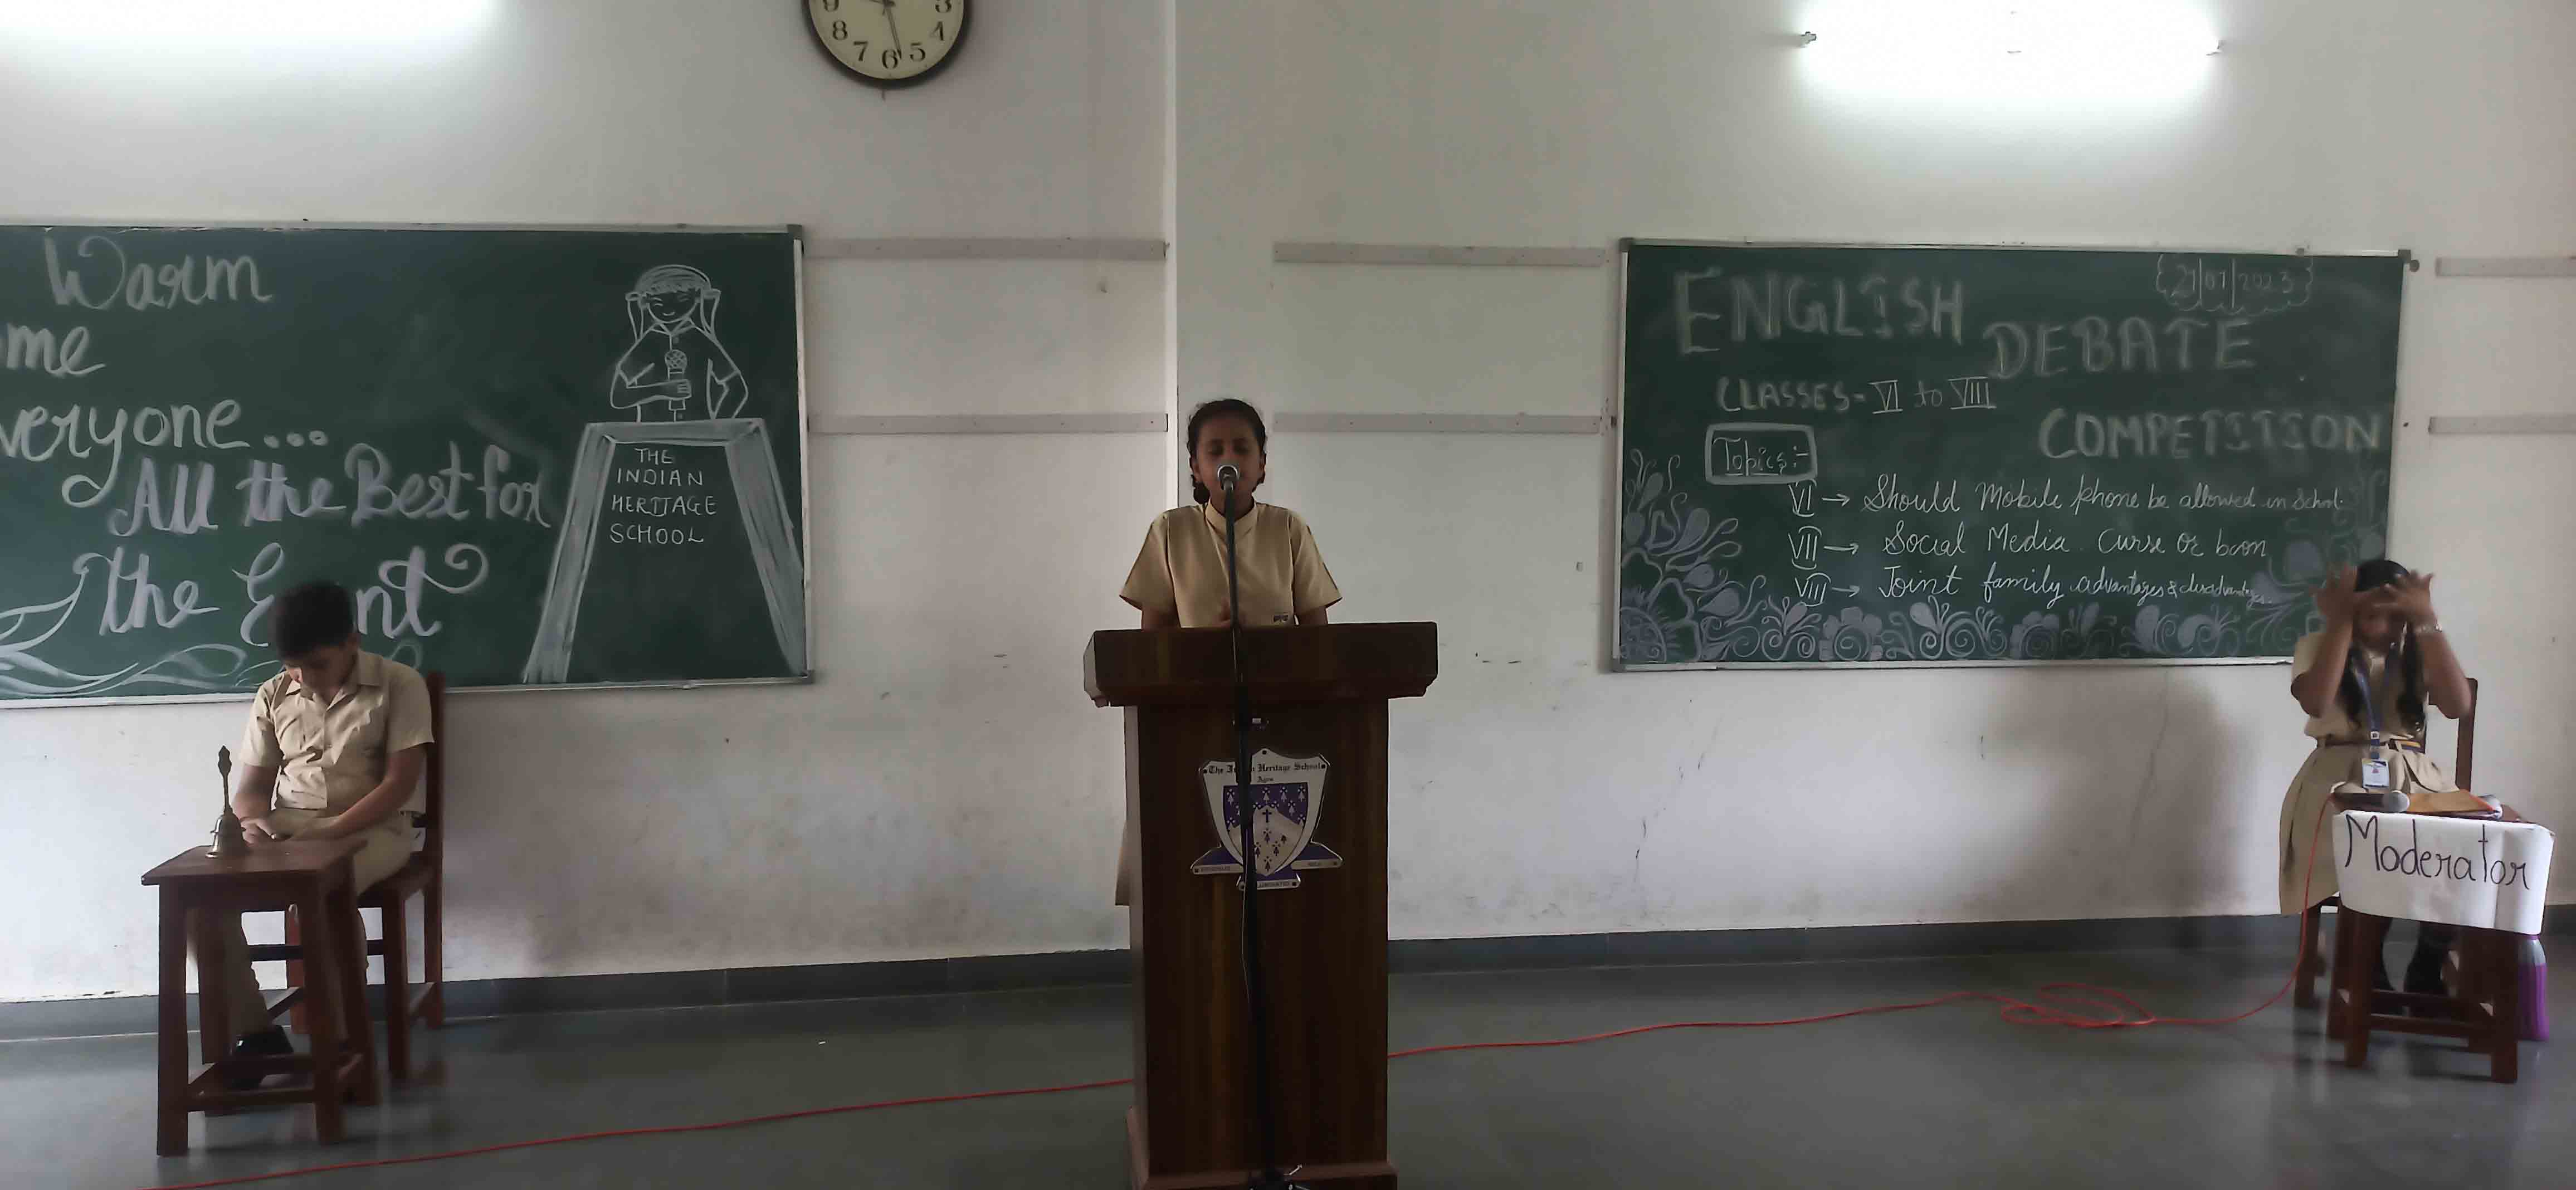 English Debate Competition